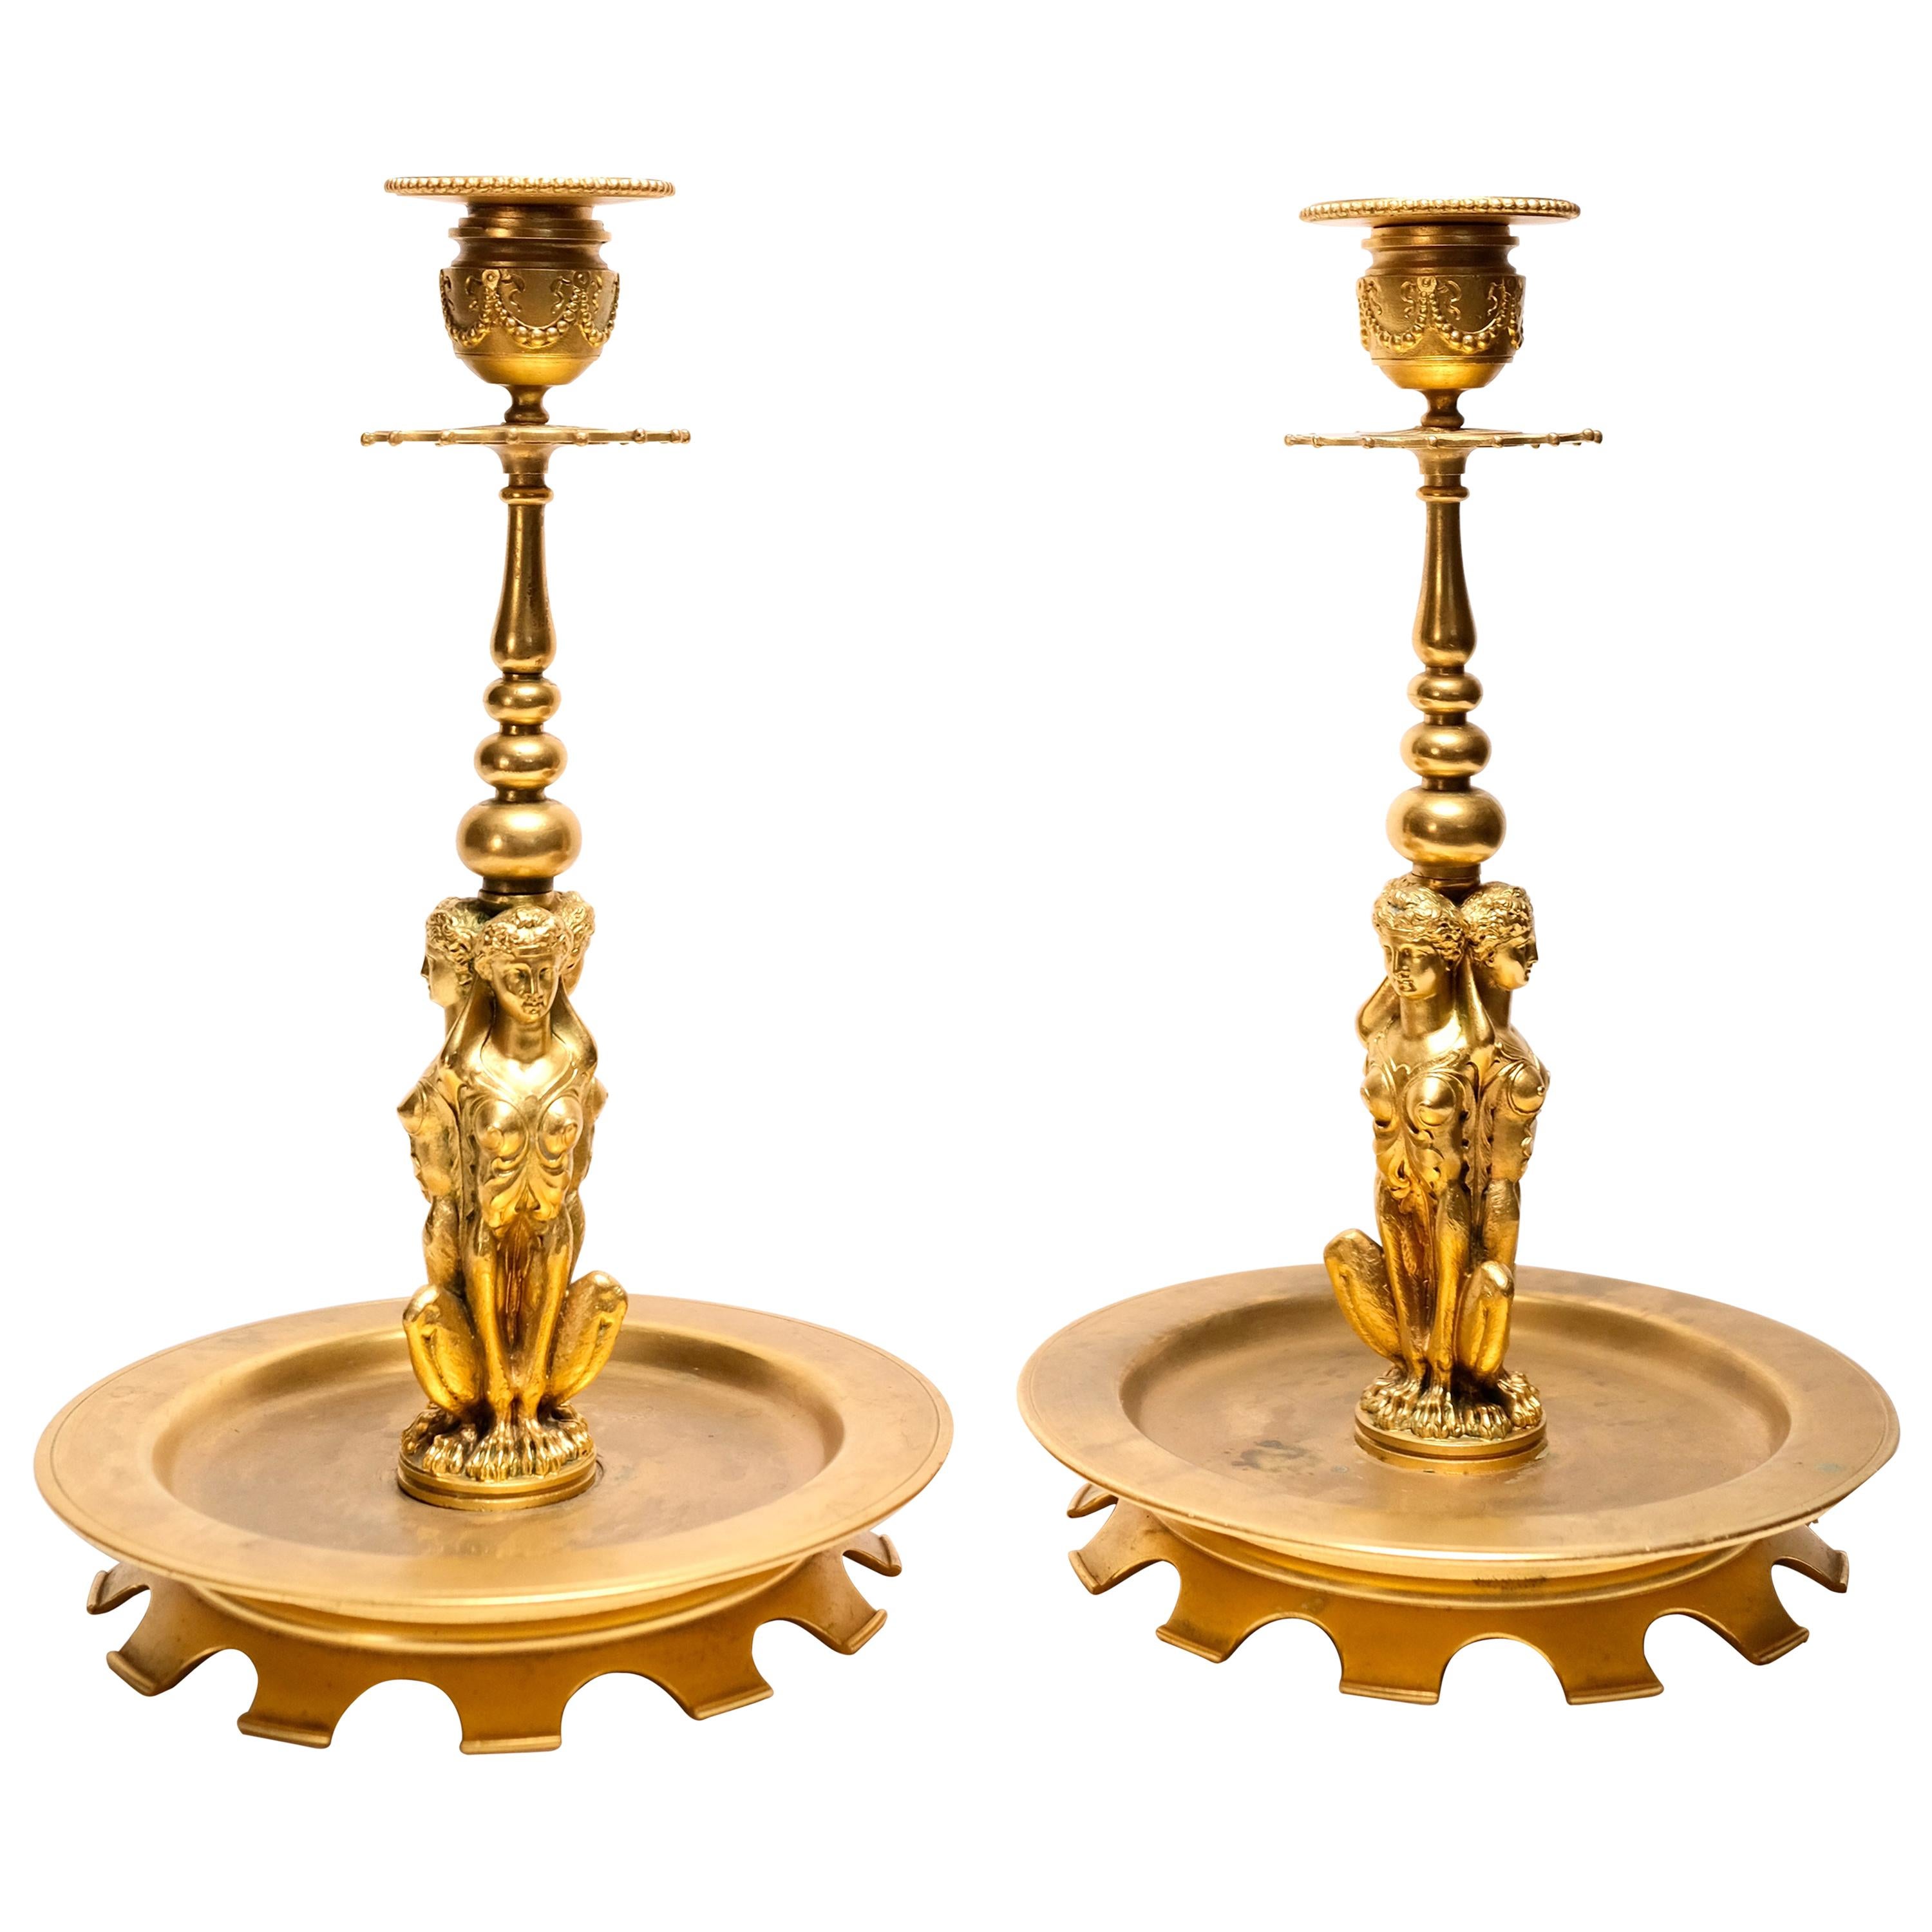 Pair of 19th Century French Doré Bronze Candlesticks